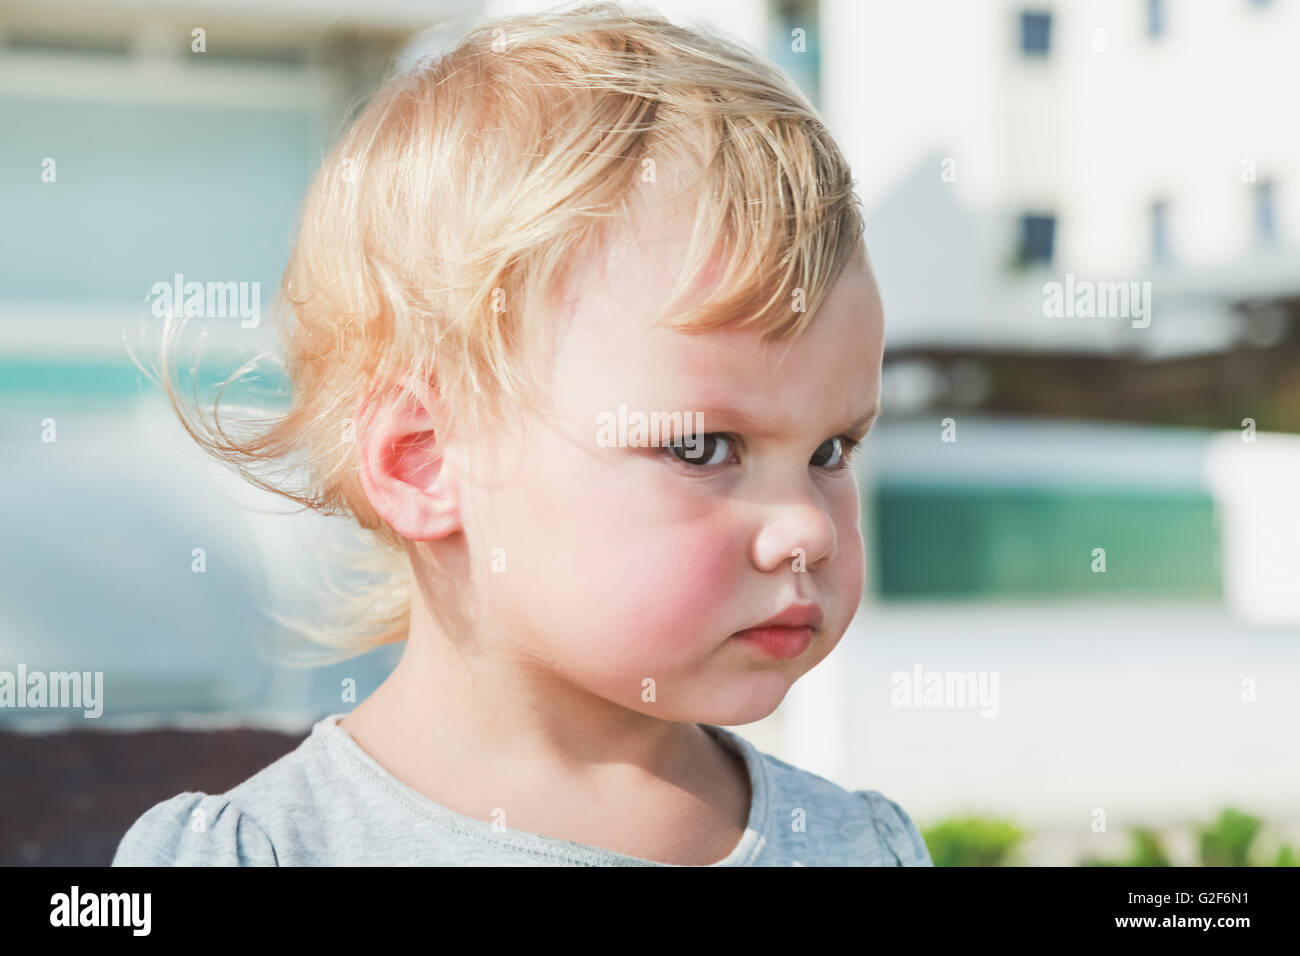 Outdoor closeup portrait of serious cute Caucasian blond baby girl Stock Photo